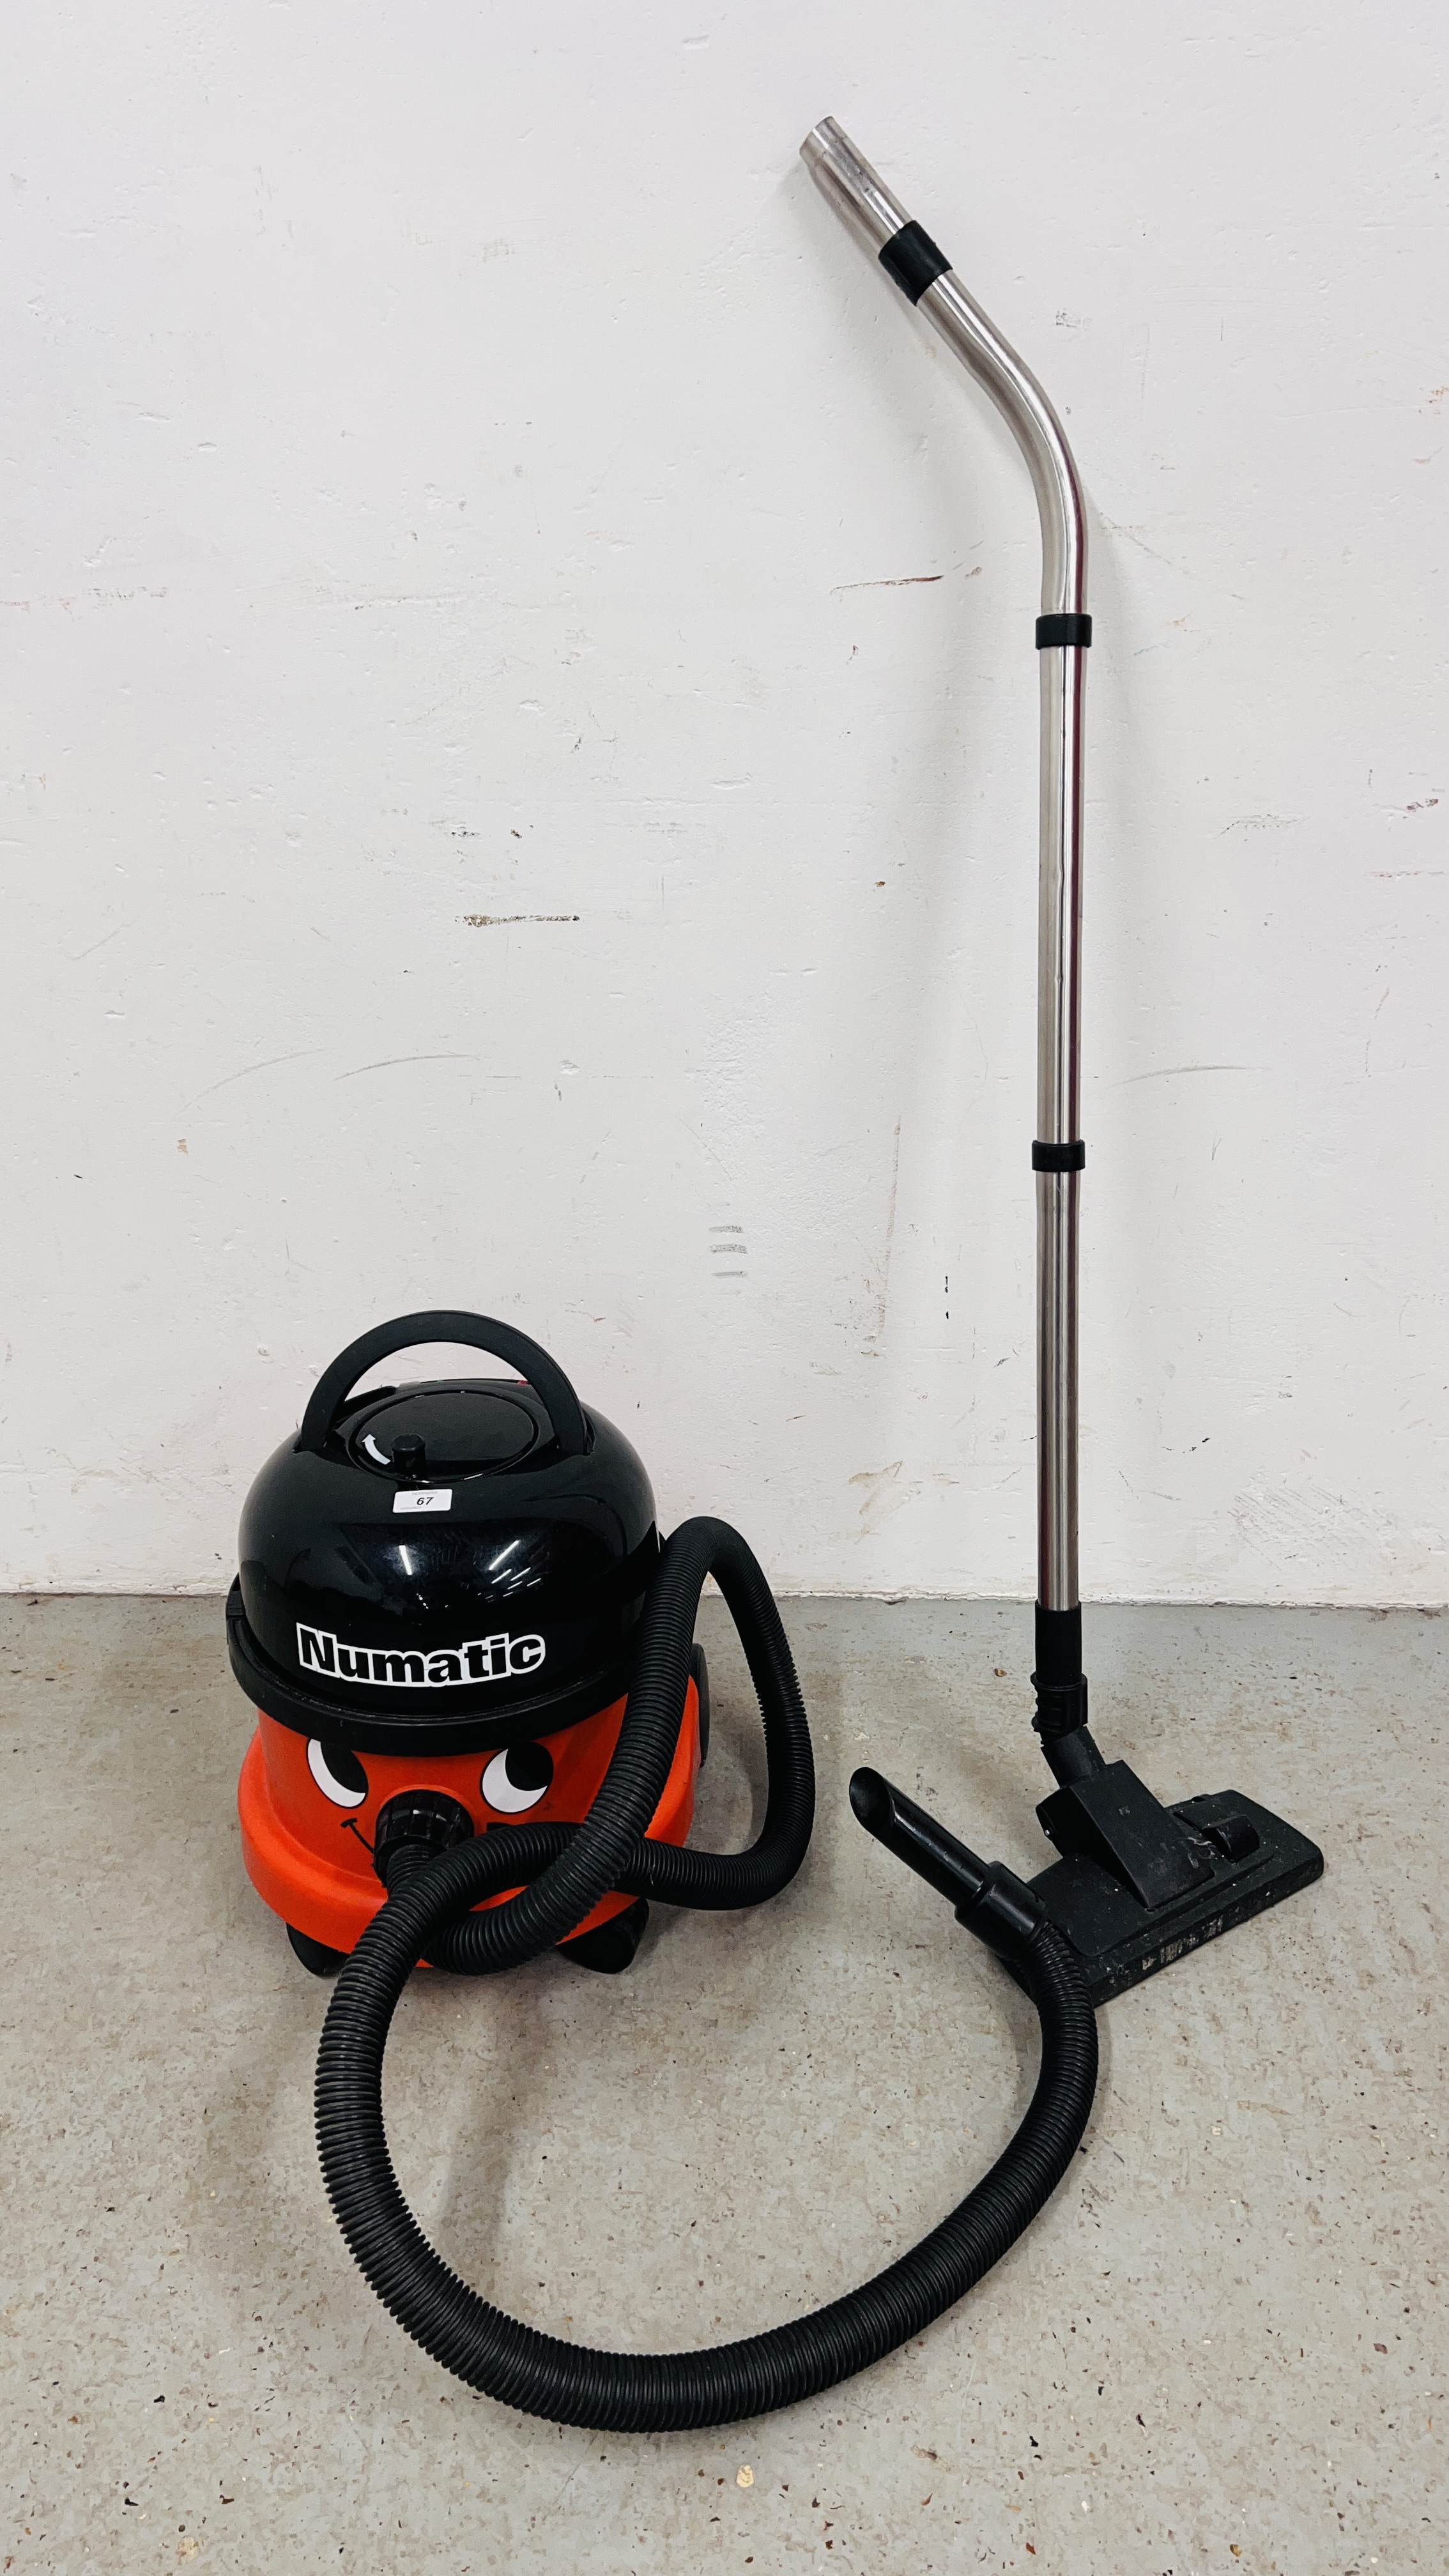 A HENRY VACUUM CLEANER - SOLD AS SEEN